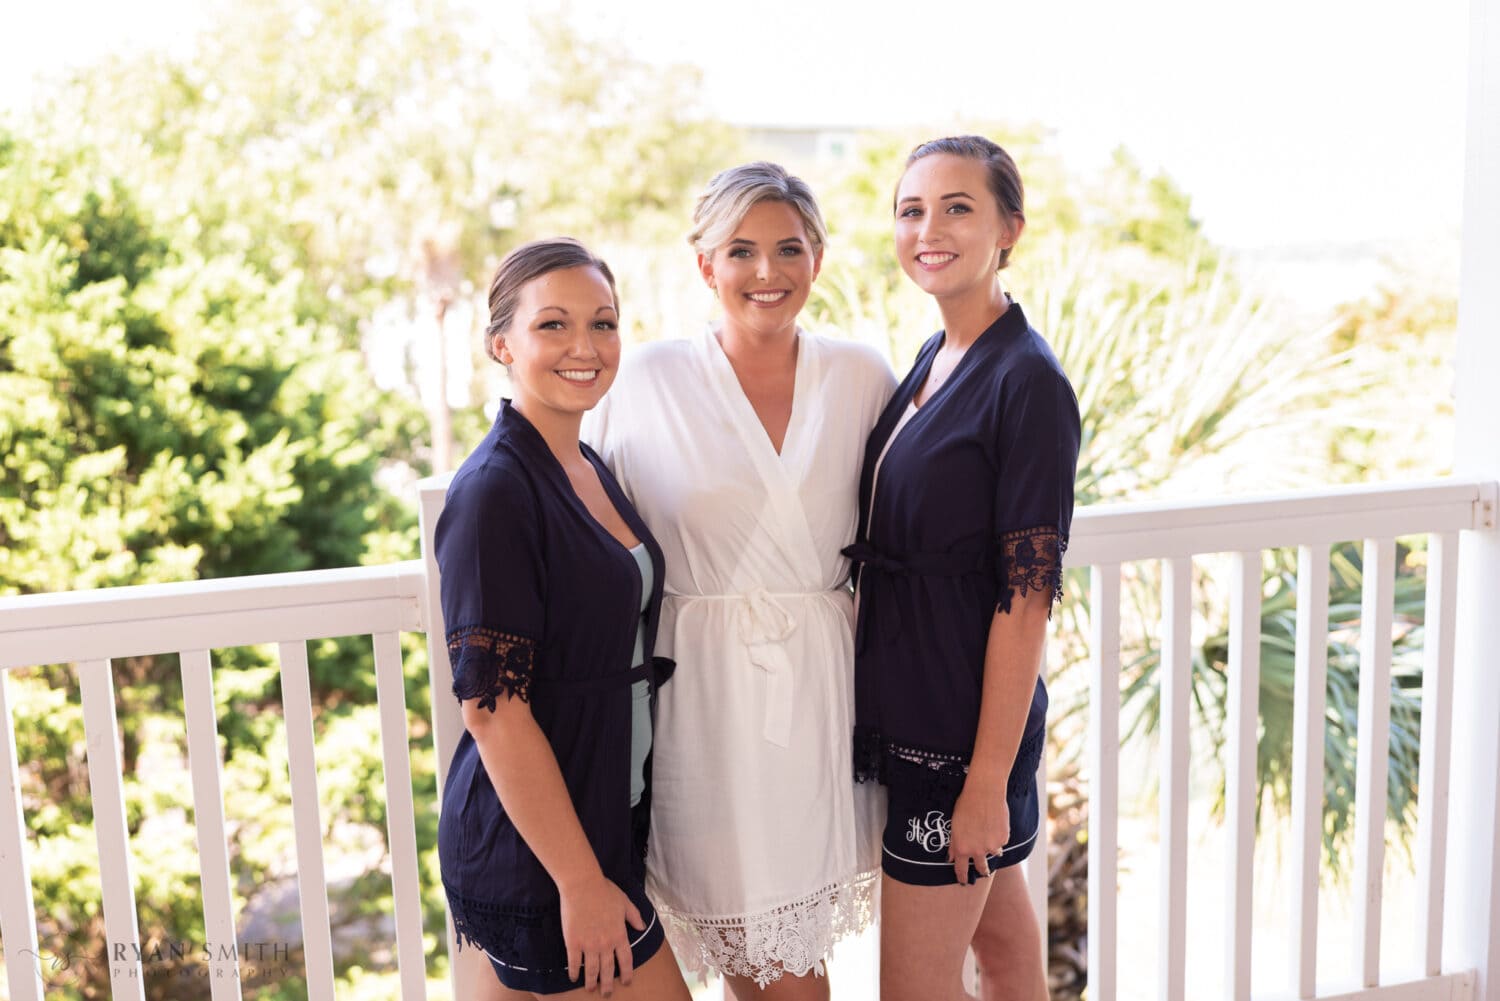 Bride with bridesmaids in robes - Folly Beach - Charleston